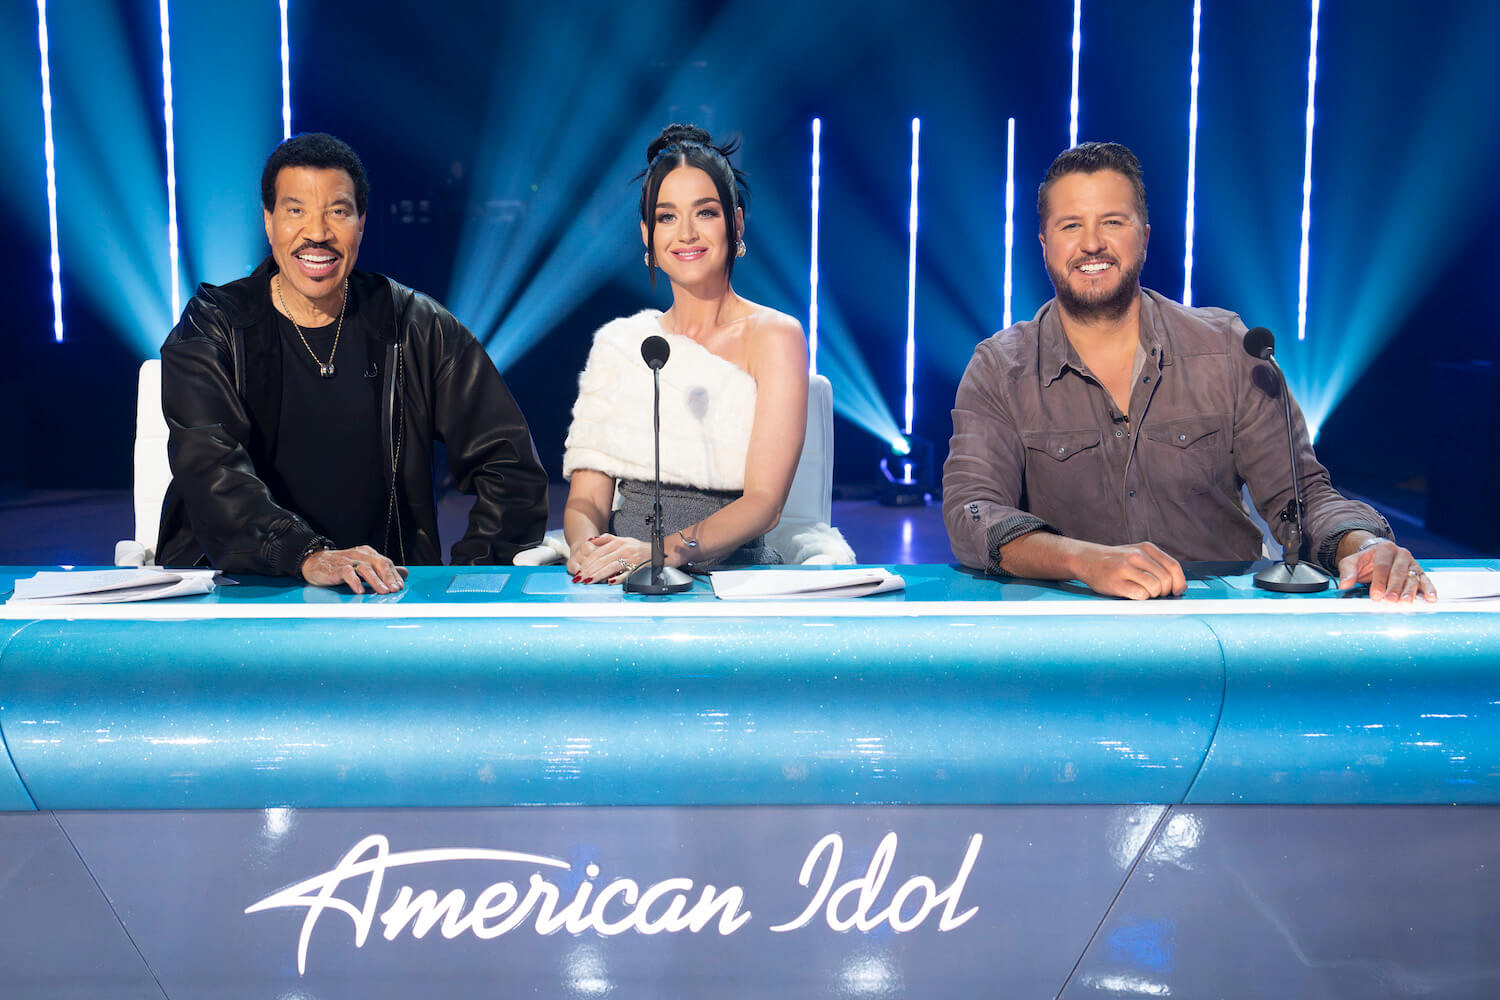 Lionel Richie, Katy Perry, and Luke Bryan sitting at the 'American Idol' Season 22 judges table 